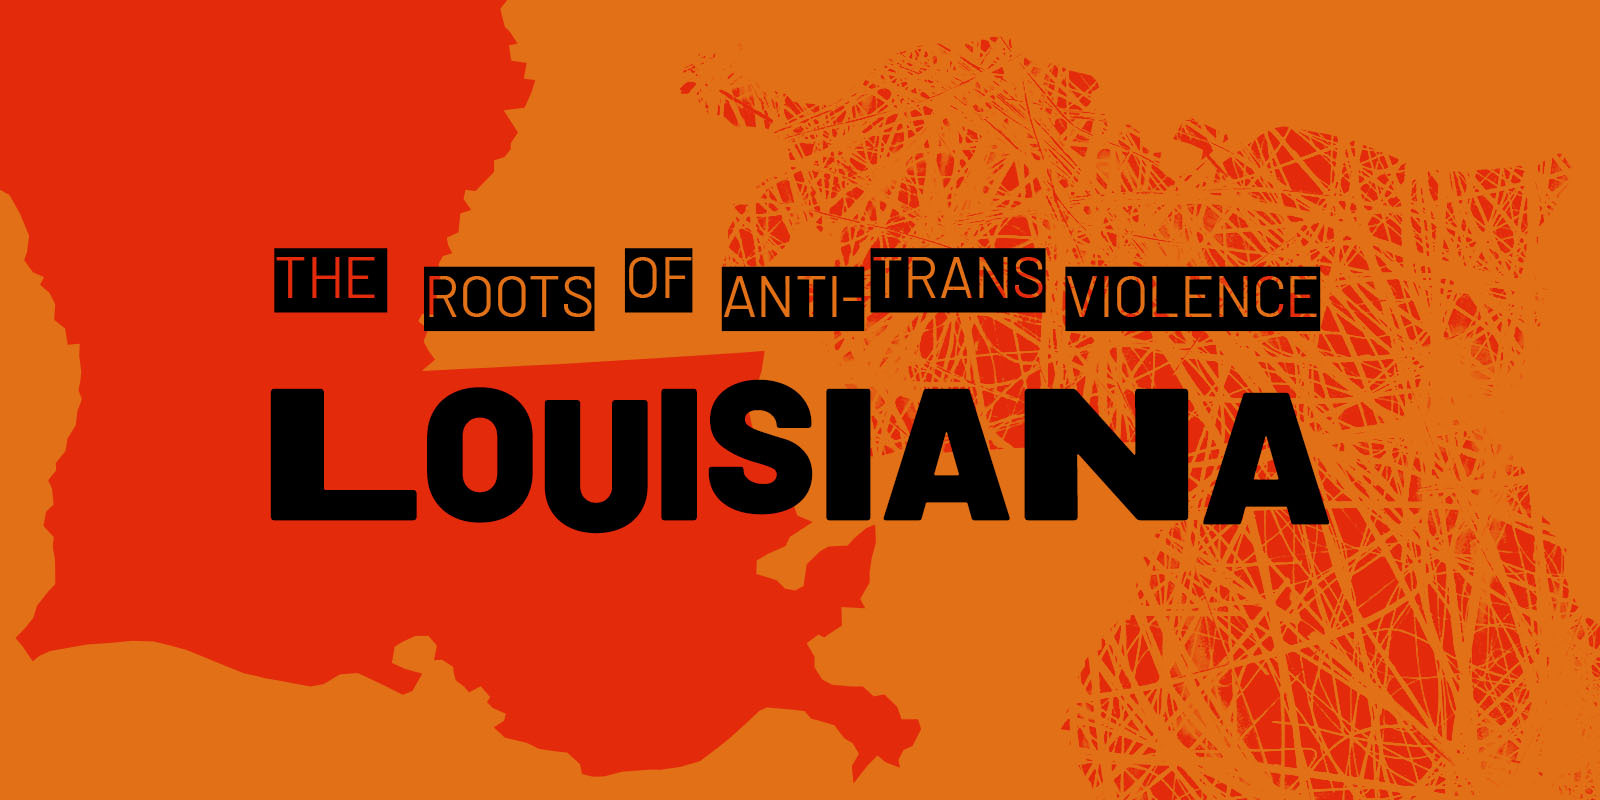 The Roots of Anti-Violence: Louisiana is set against an orange background.